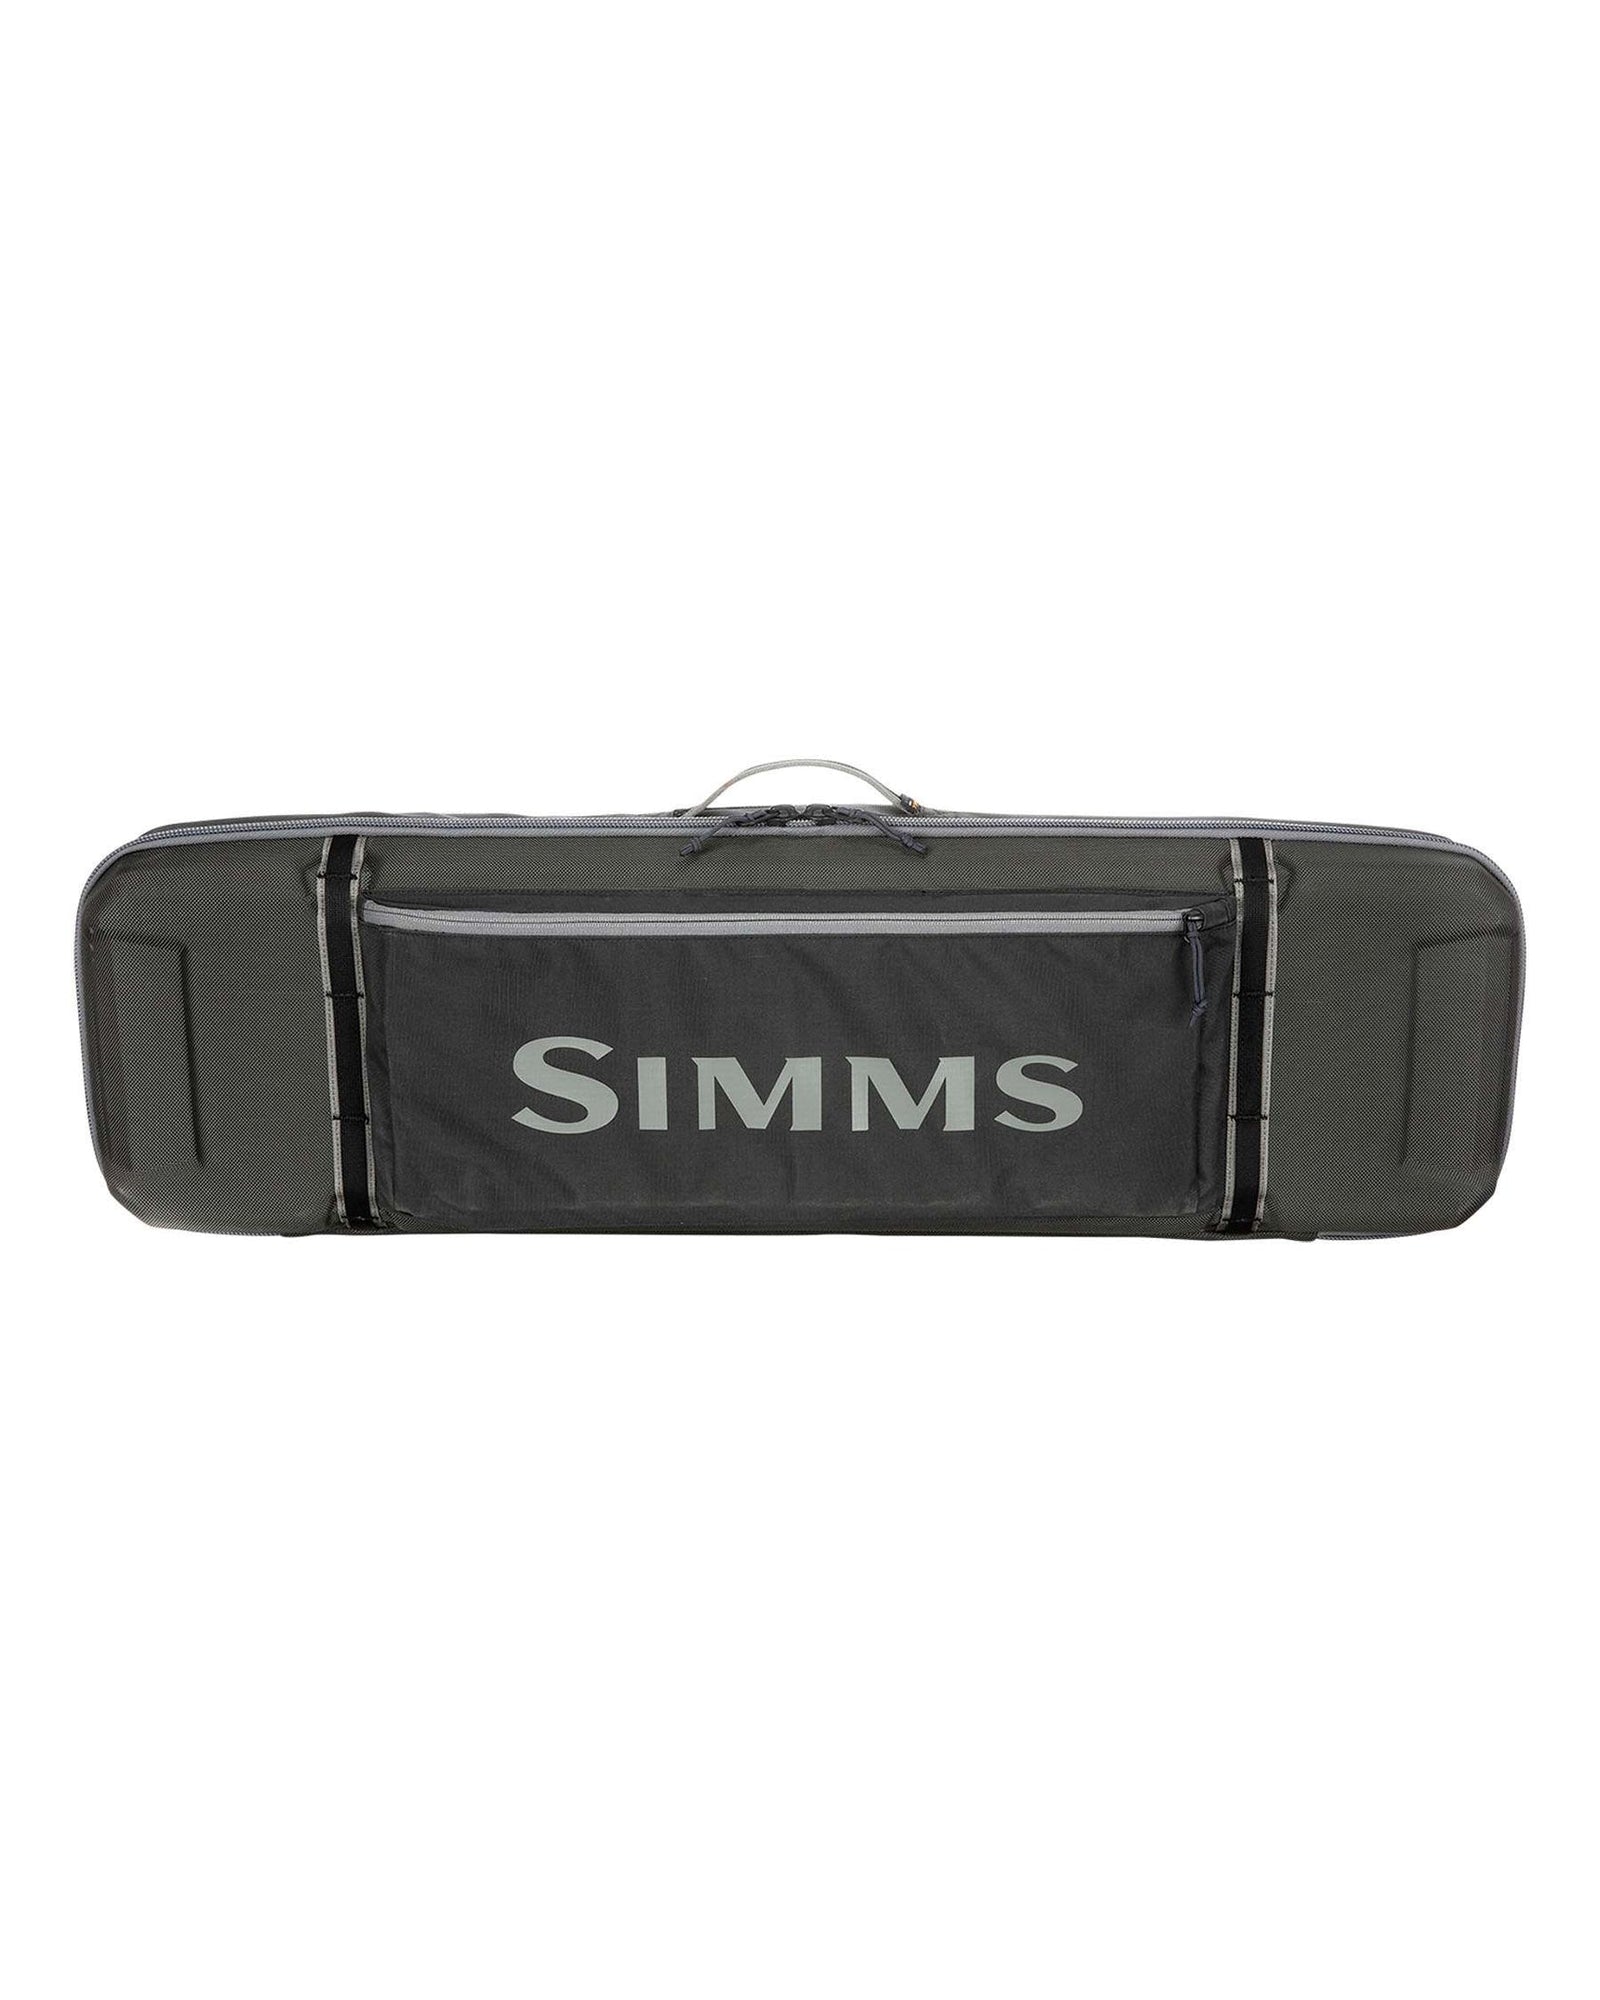 Luggage & Rod Cases Tagged Simms - Fin & Fire Fly Shop